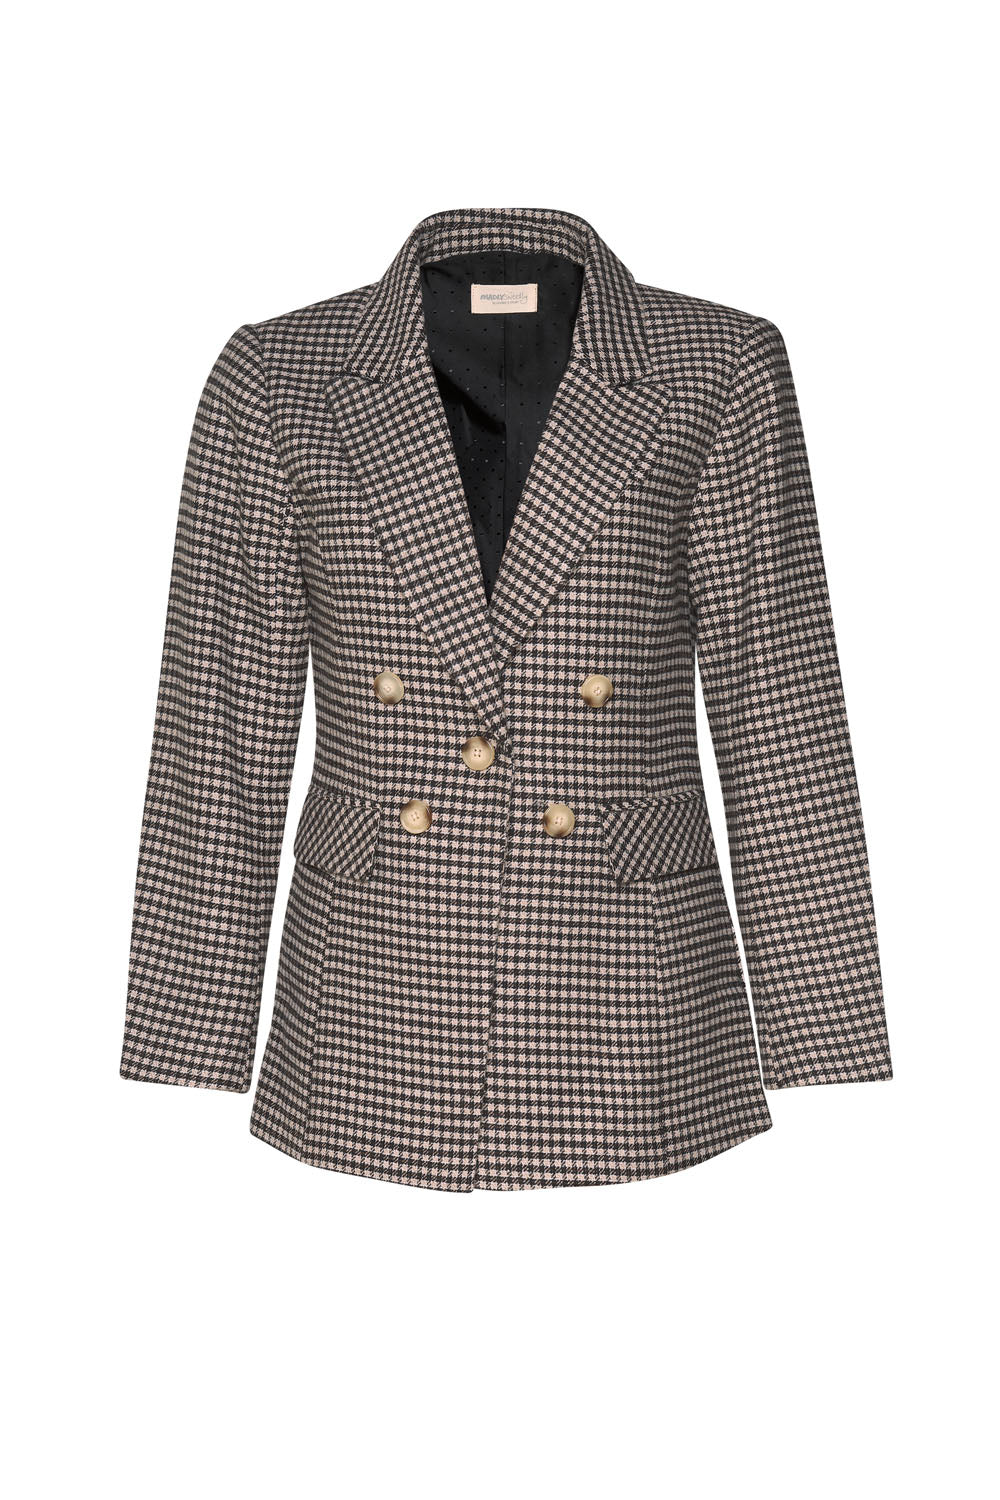 MADLY SWEETLY PLAID PITT BLAZER - BLACK | BEIGE CHECK - THE VOGUE STORE